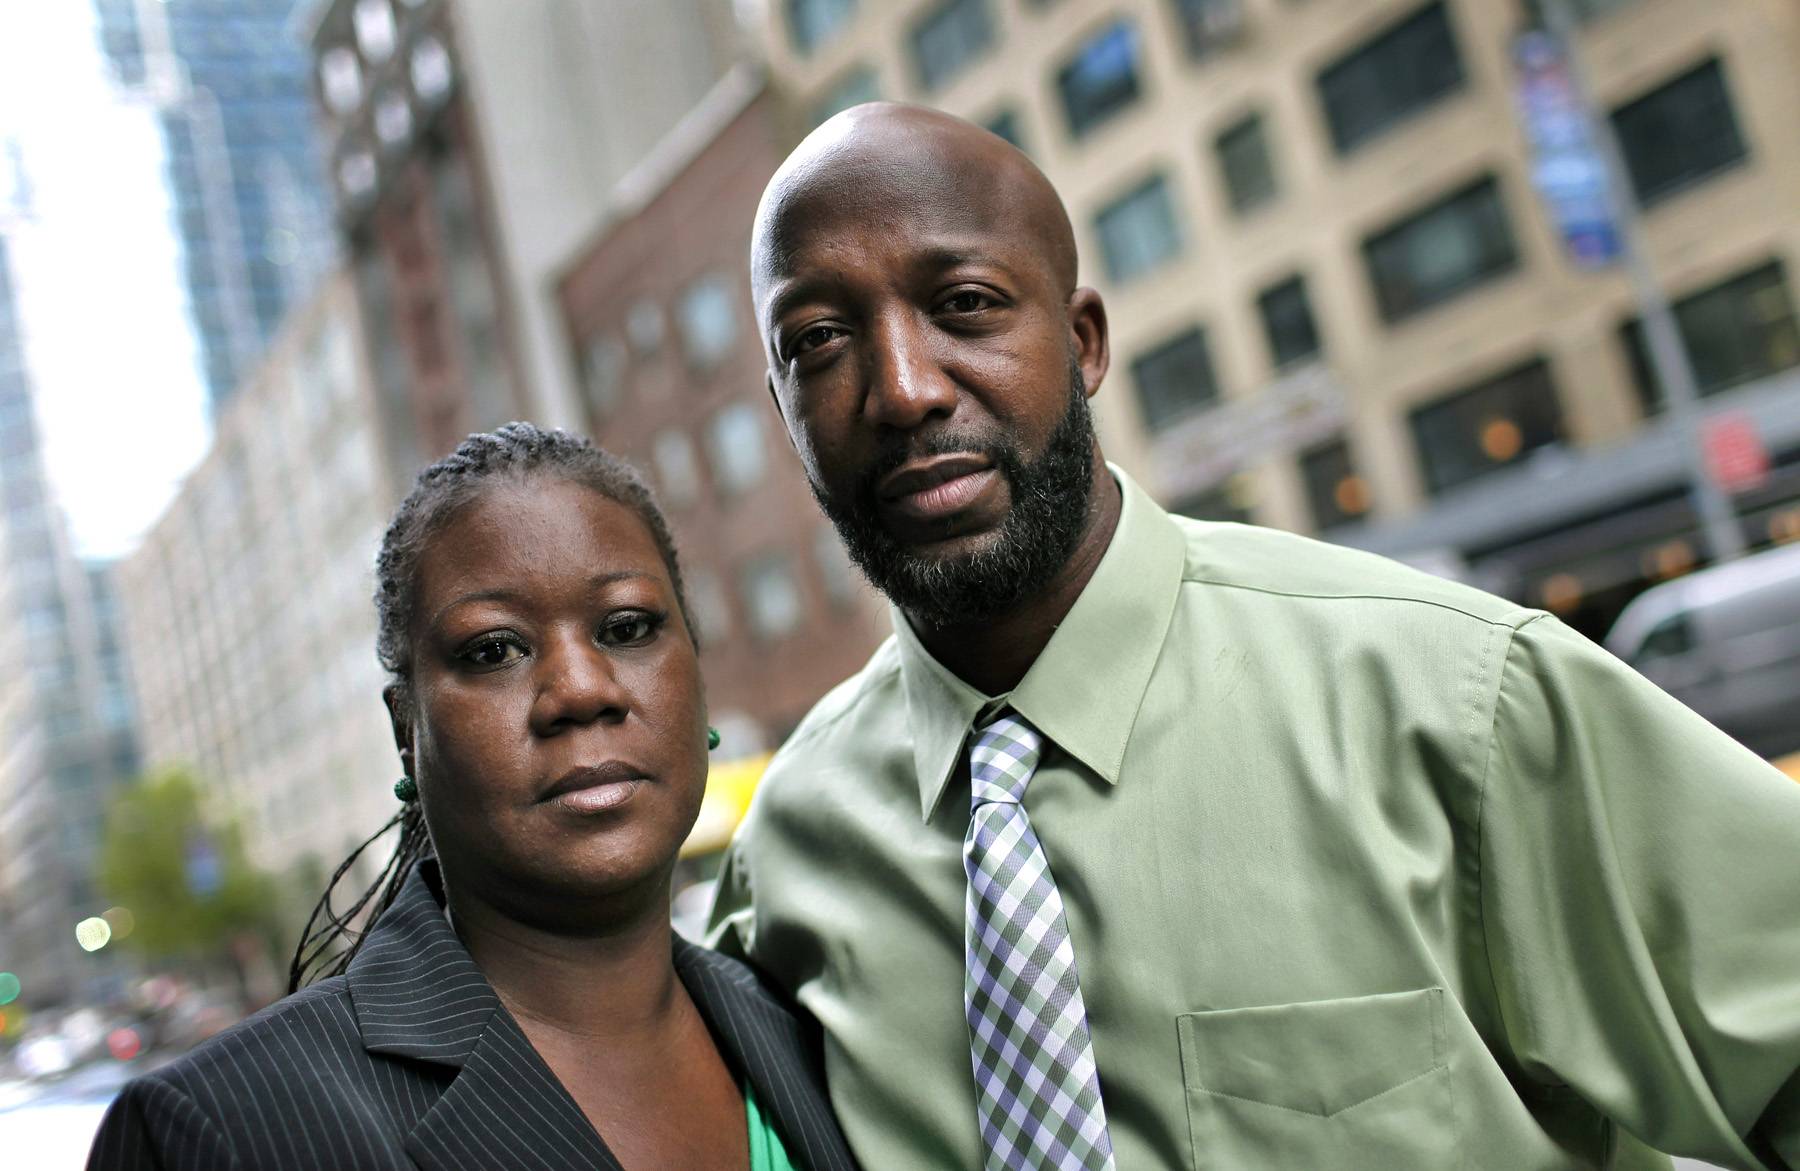 Trayvon's Parents React Strongly to Letter From Zimmerman's Mother - On the anniversary of George Zimmerman’s arrest in the killing of Trayvon Martin, his mother posted a letter saying that the justice system wasn’t fair to her son. Benjamin Crump, Trayvon’s family lawyer, responded saying, “for the Zimmerman family to allege that the justice system doesn’t work simply because they are unhappy their son was arrested” is “disingenuous” and “disrespectful.”&nbsp; (Photo: REUTERS/Mike Segar)